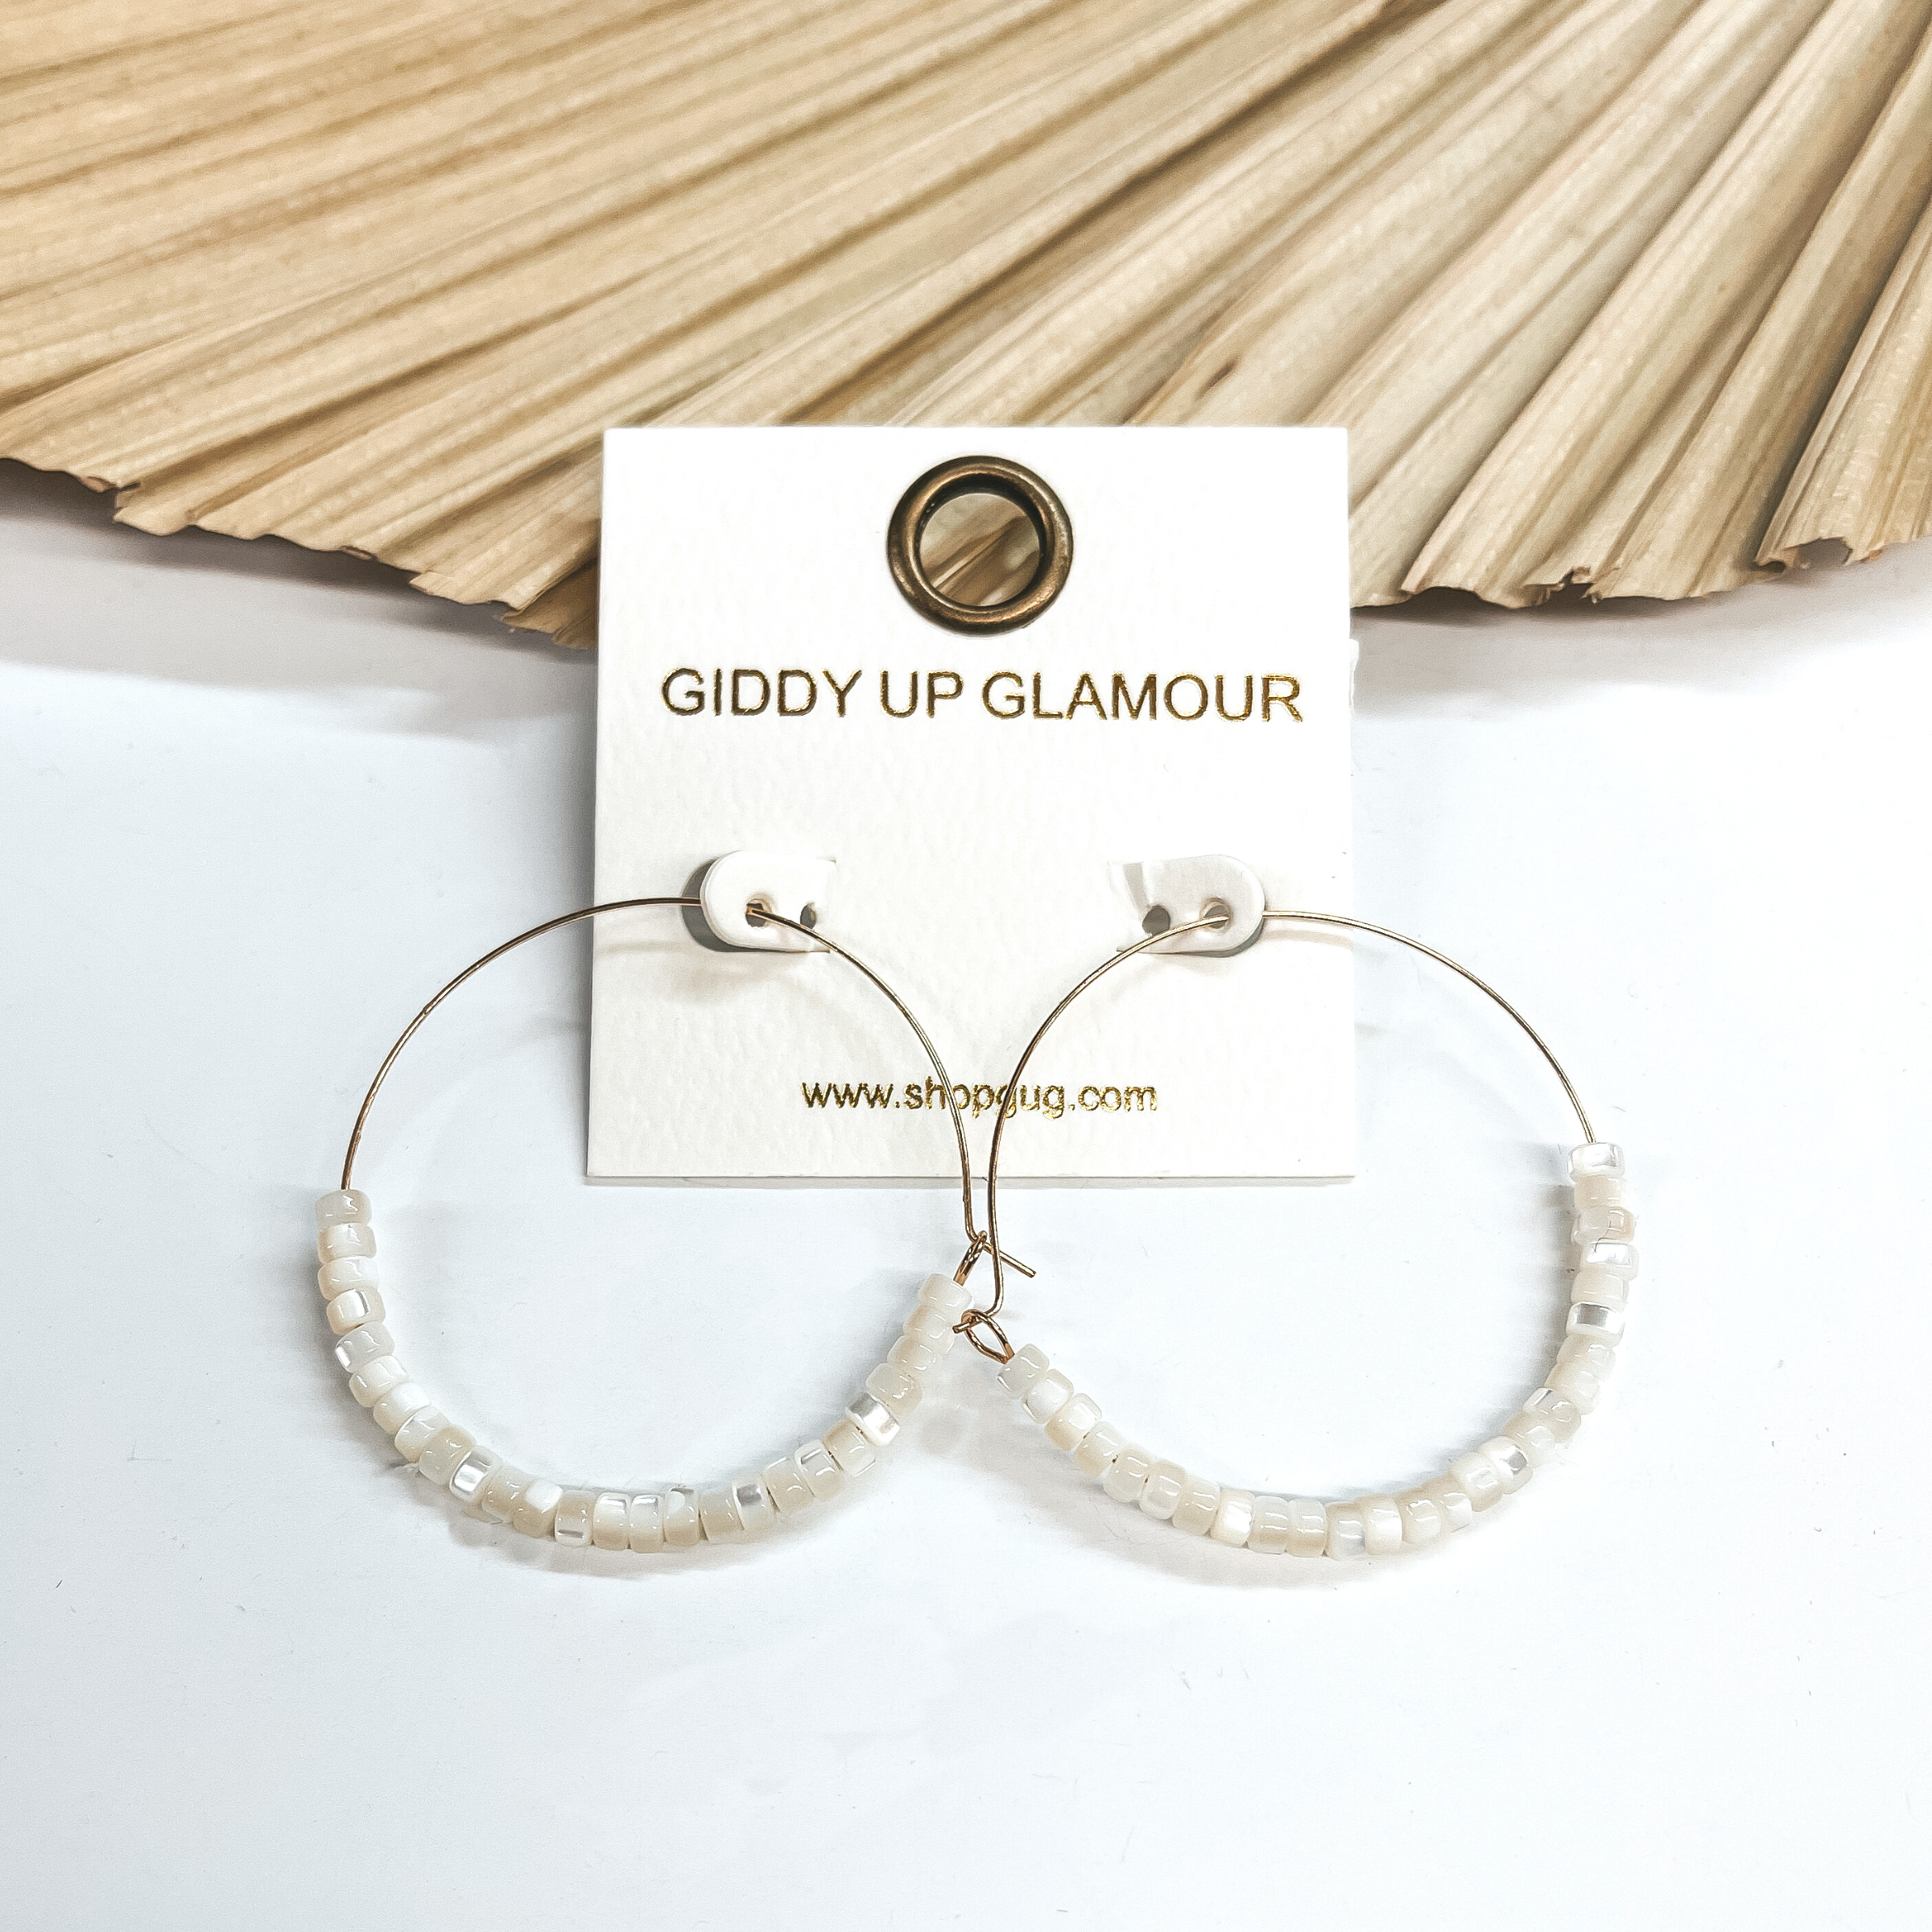 These are thin wire gold hoops with mother of pearl  beads in ivory in the bottom half of the  earrings. These earrings are taken leaning up  against a dried up palm leaf and white background.